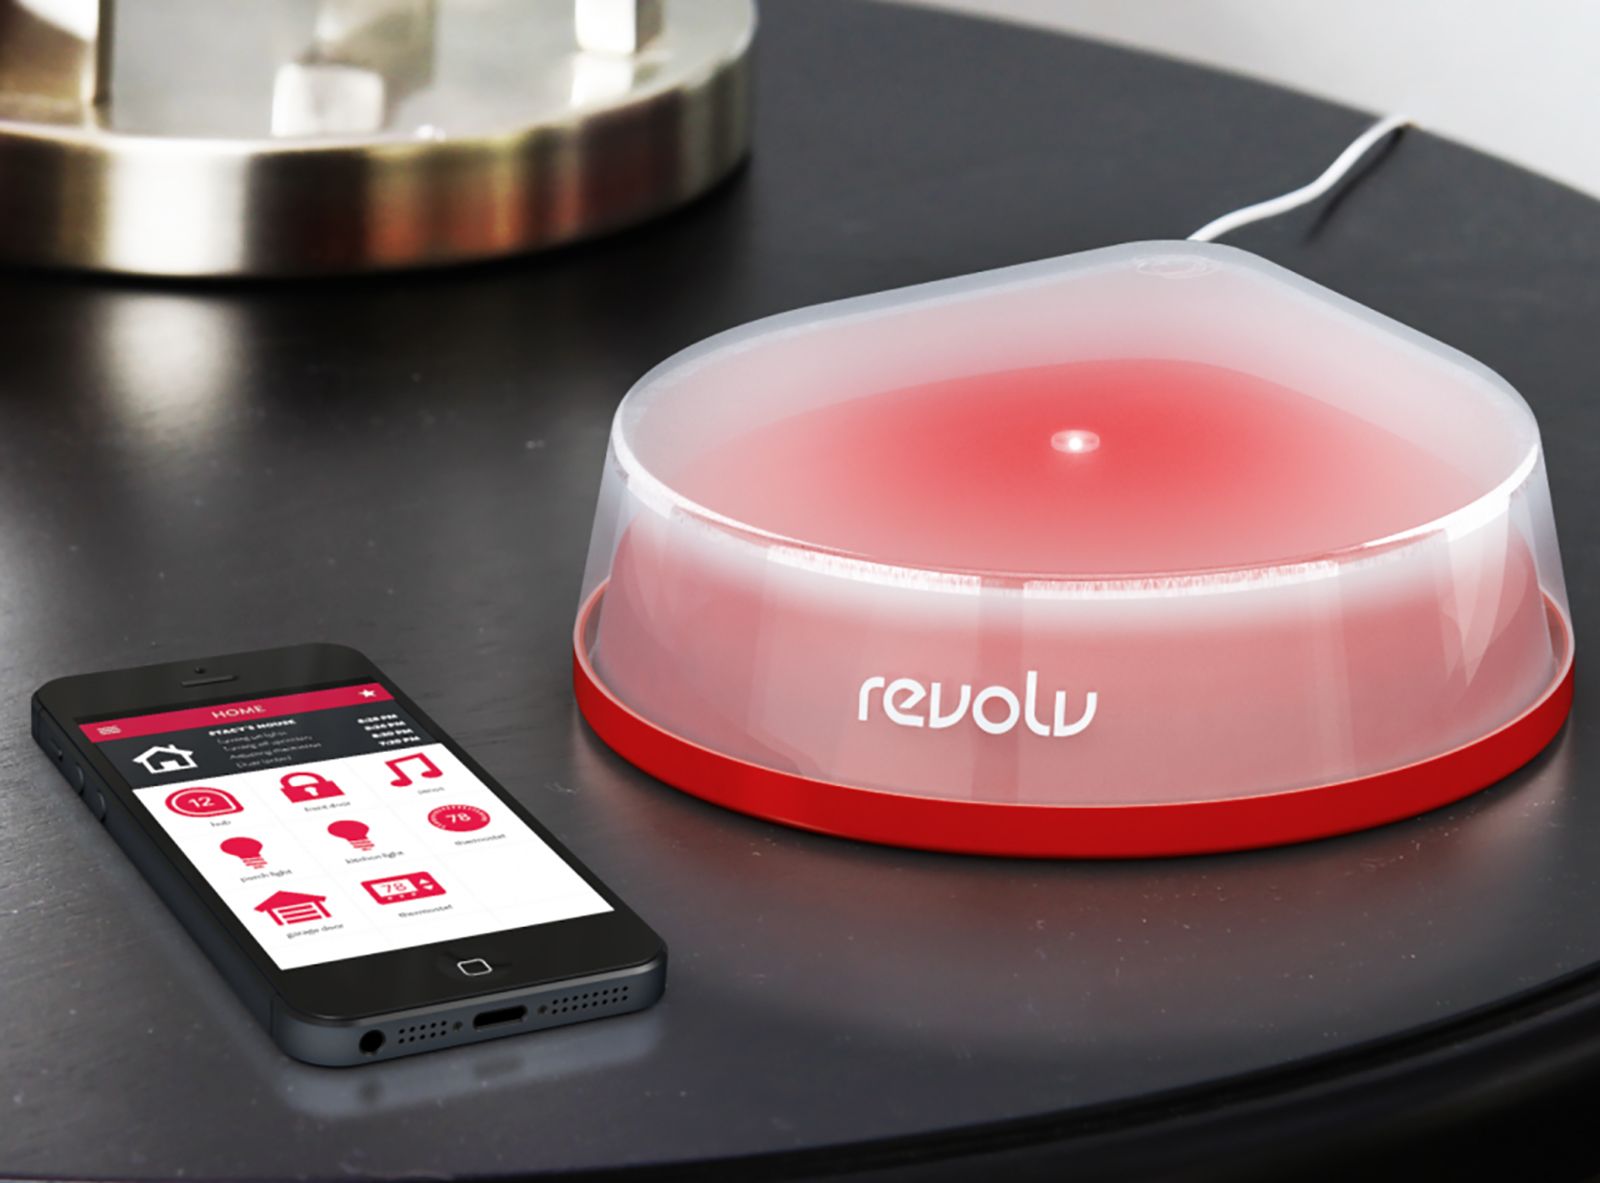 nest acquires revolv maker of smart home automation hub image 1